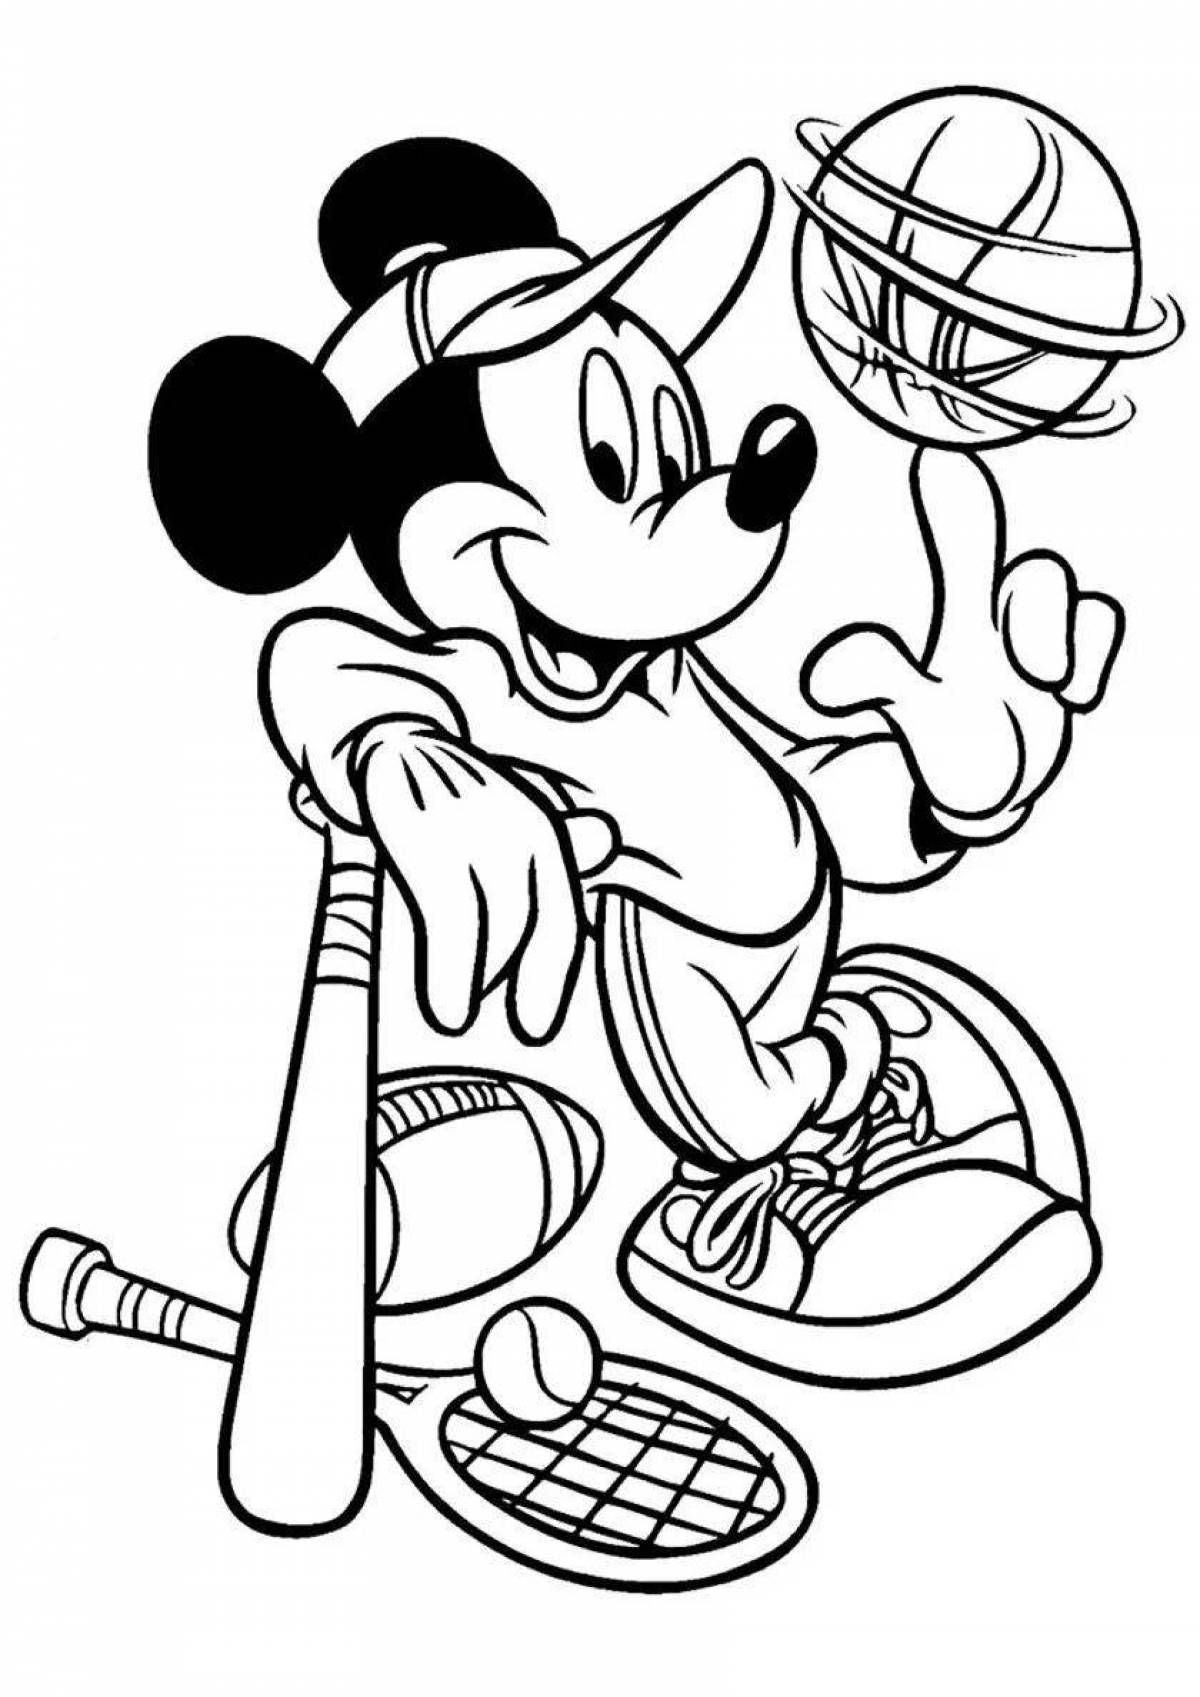 Mickey's wonderful coloring games